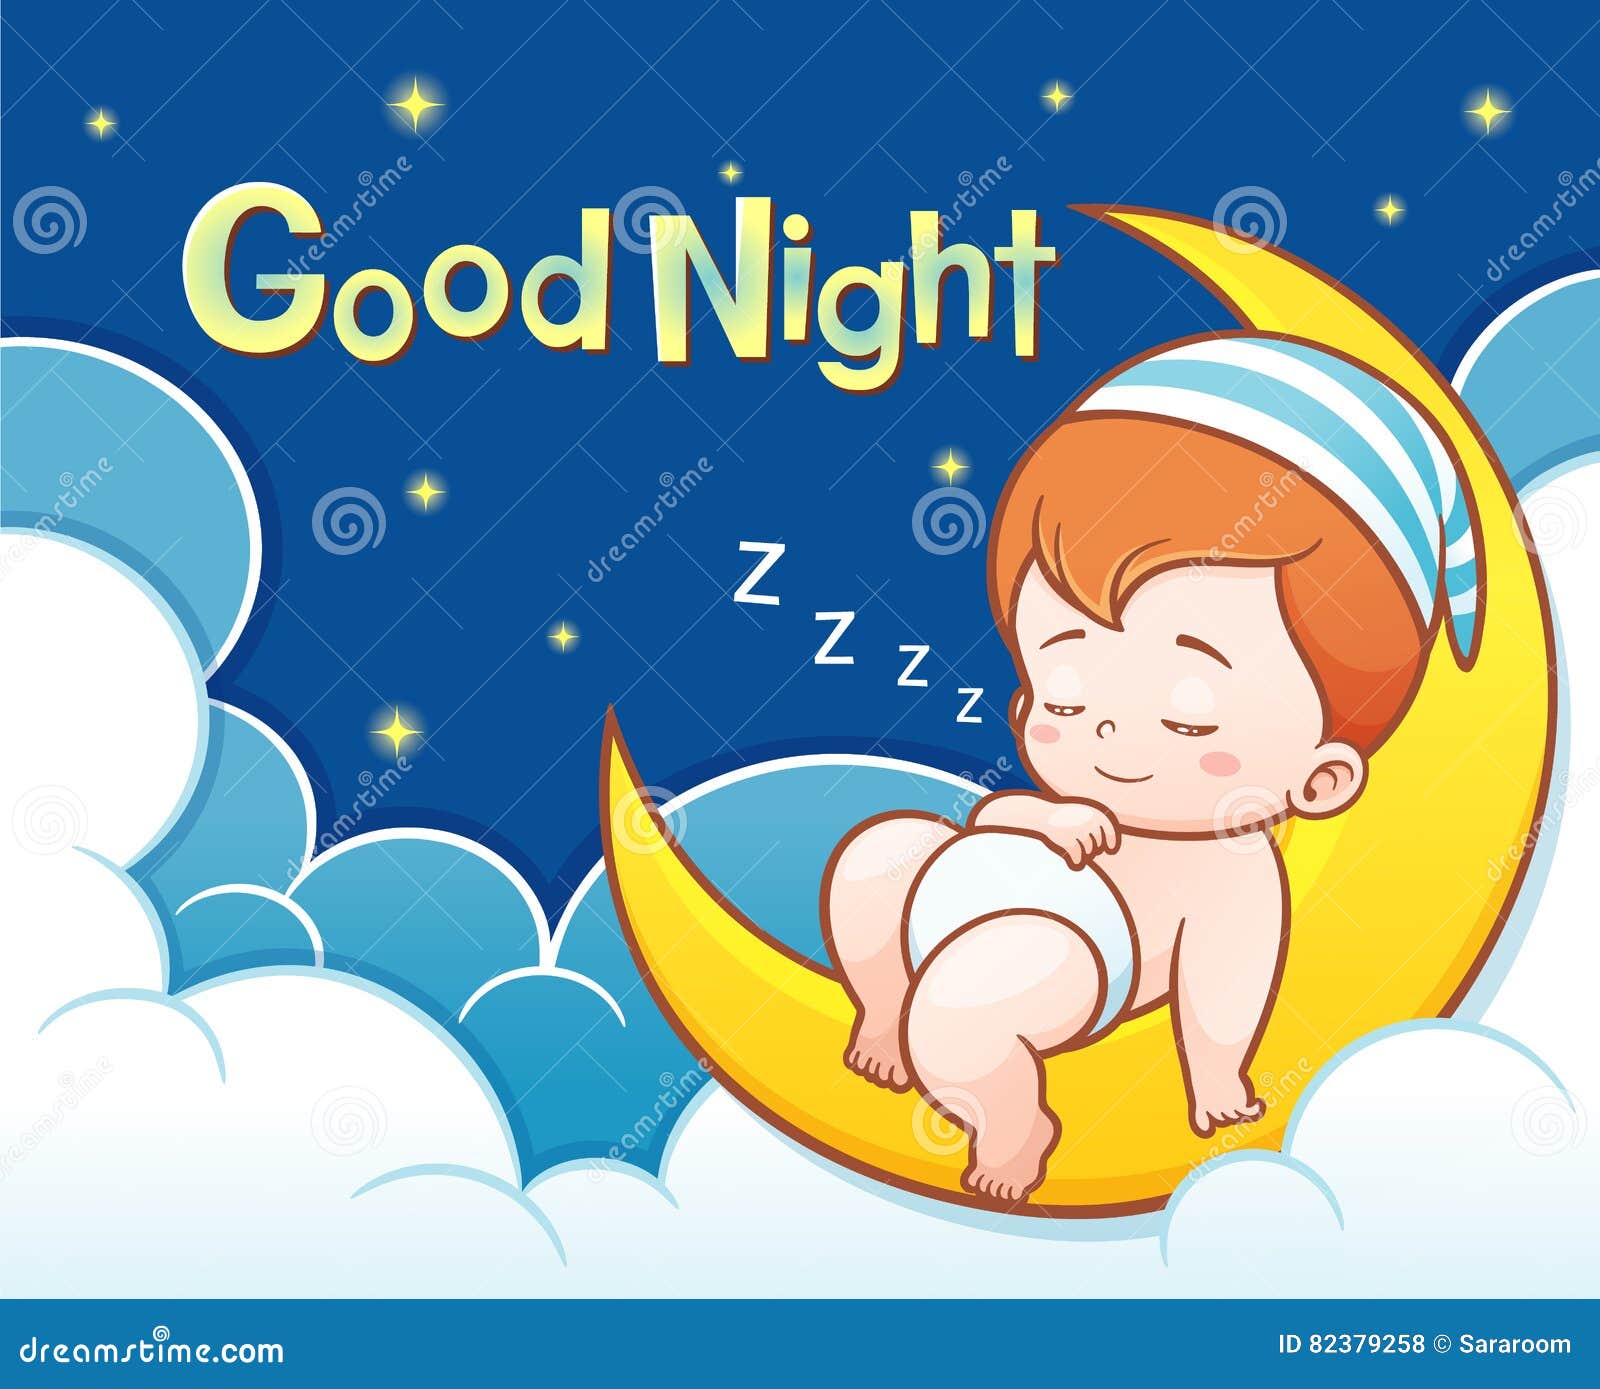 Baby stock vector. Illustration of character, night, star - 82379258